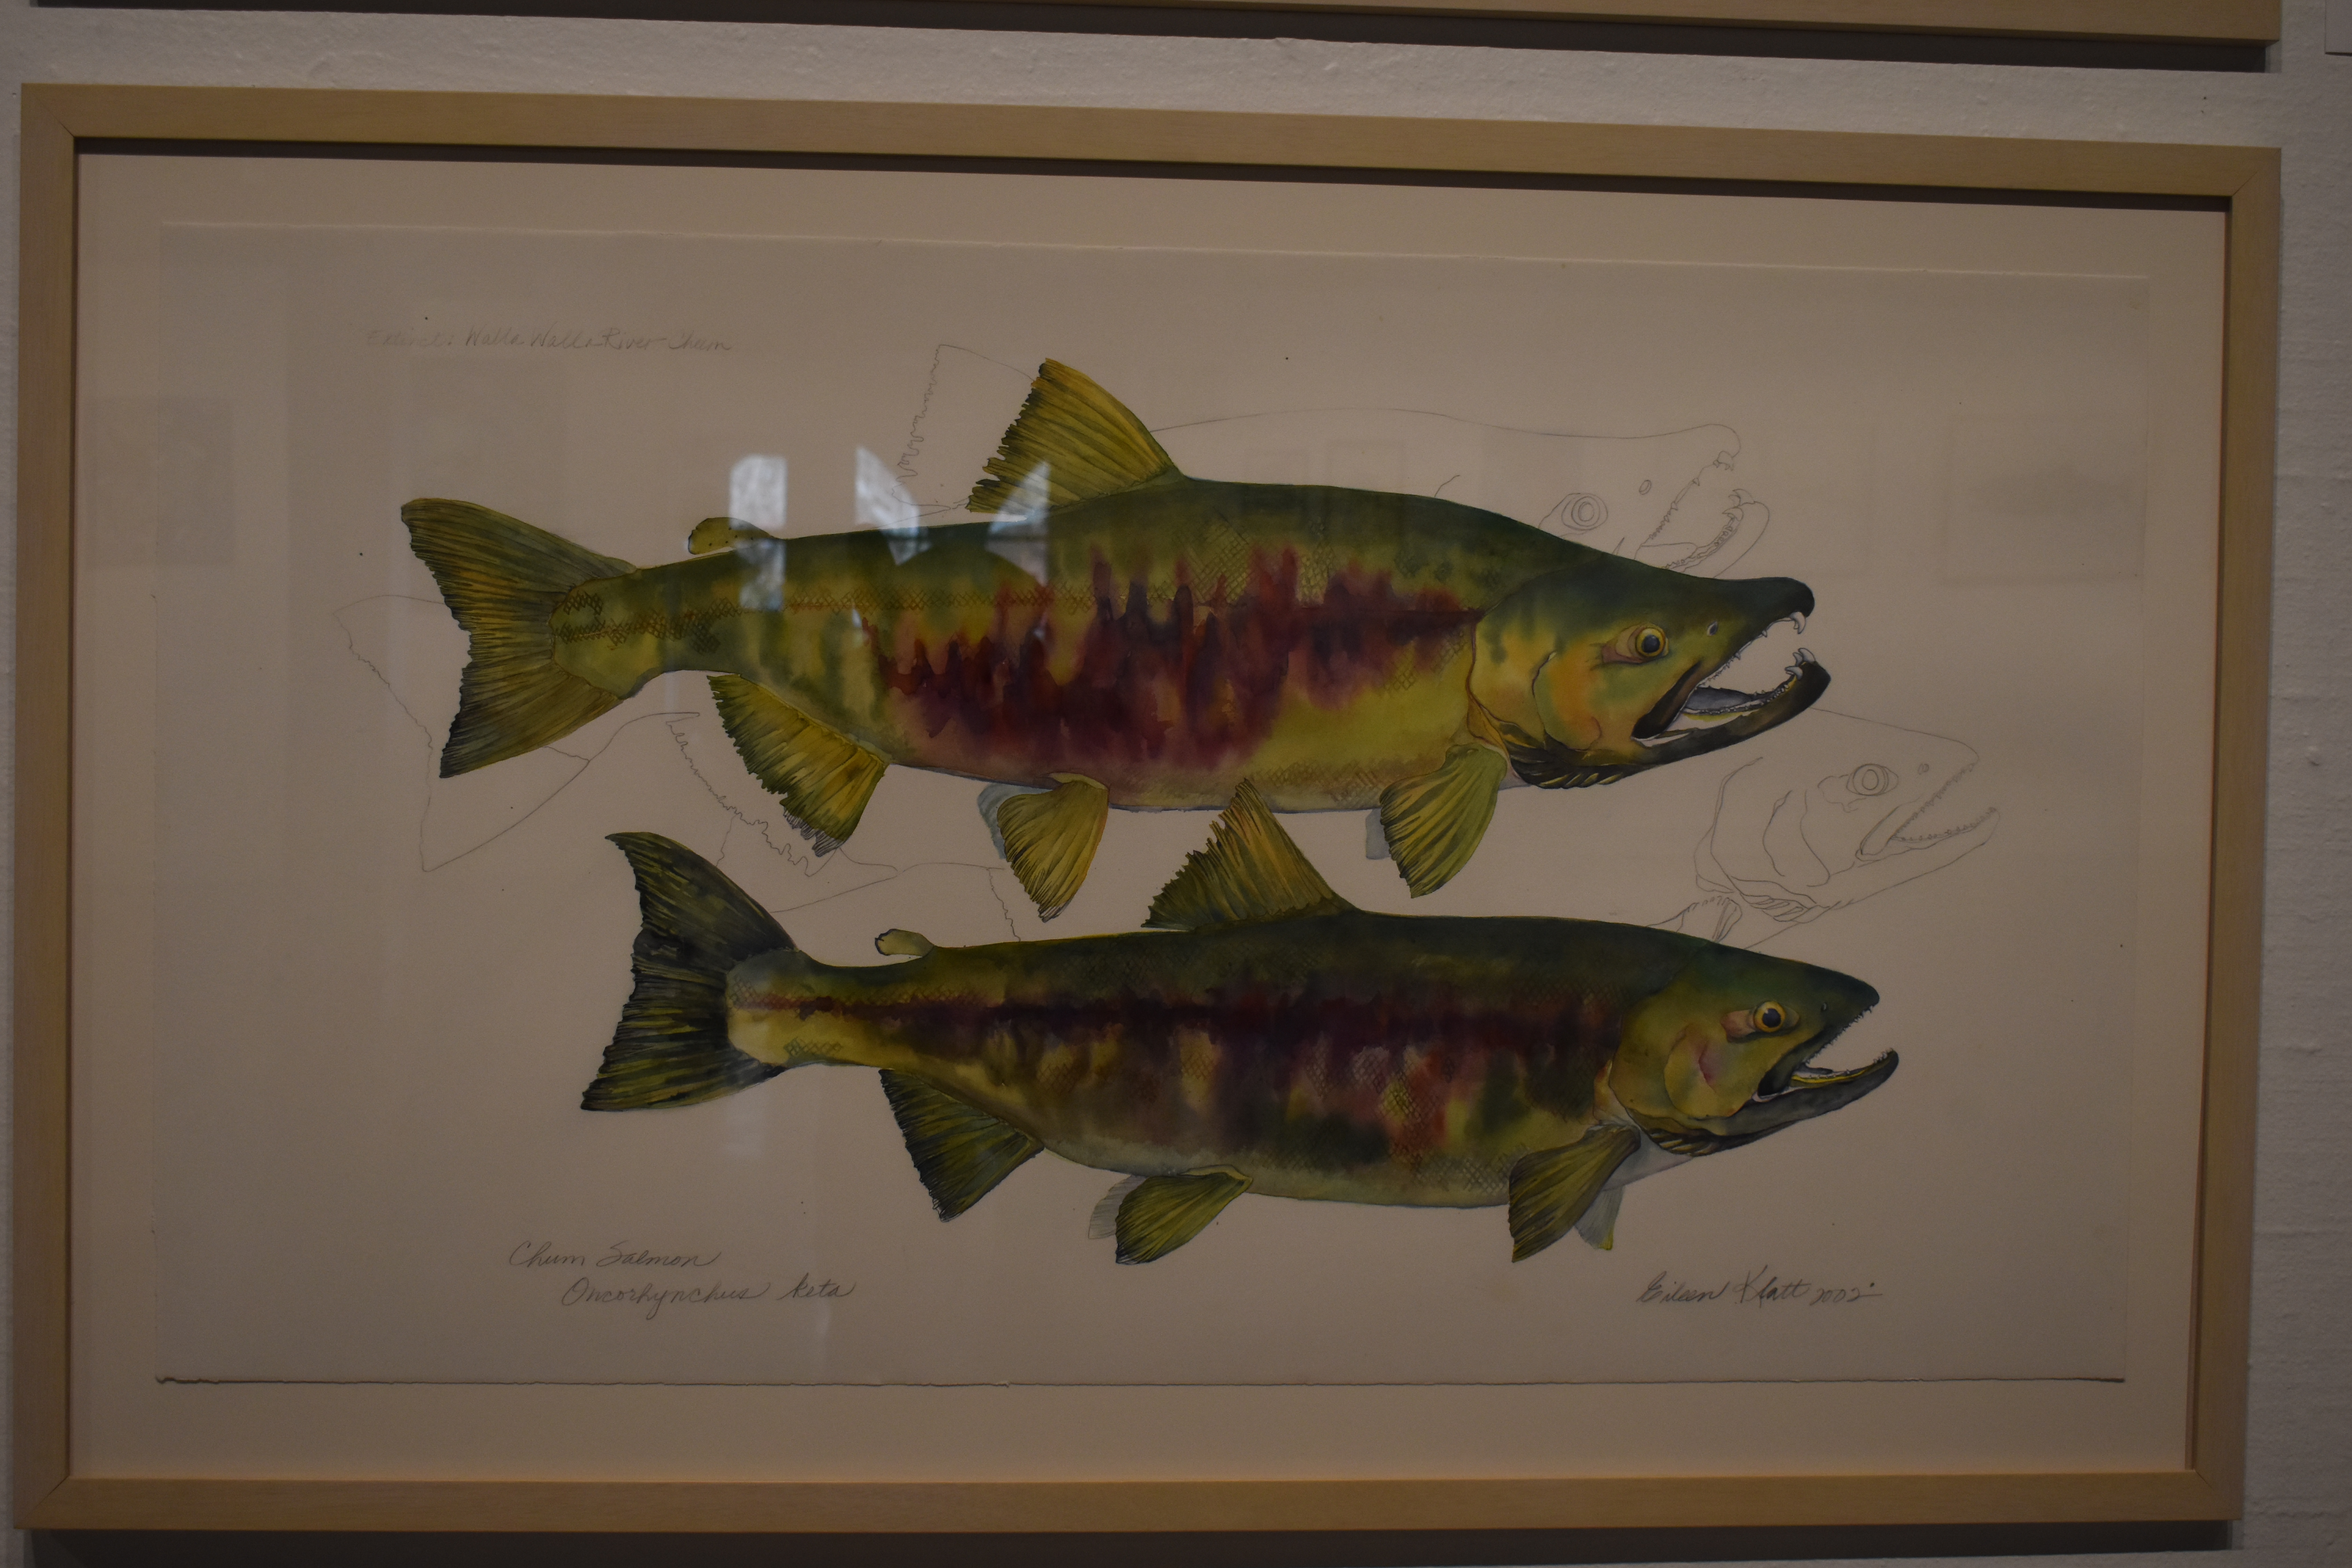 One of the mating pairs artist Eileen Klatt depicted of 61 extinct salmon from the Columbia River Basin. Photo by Lauren Gallup.